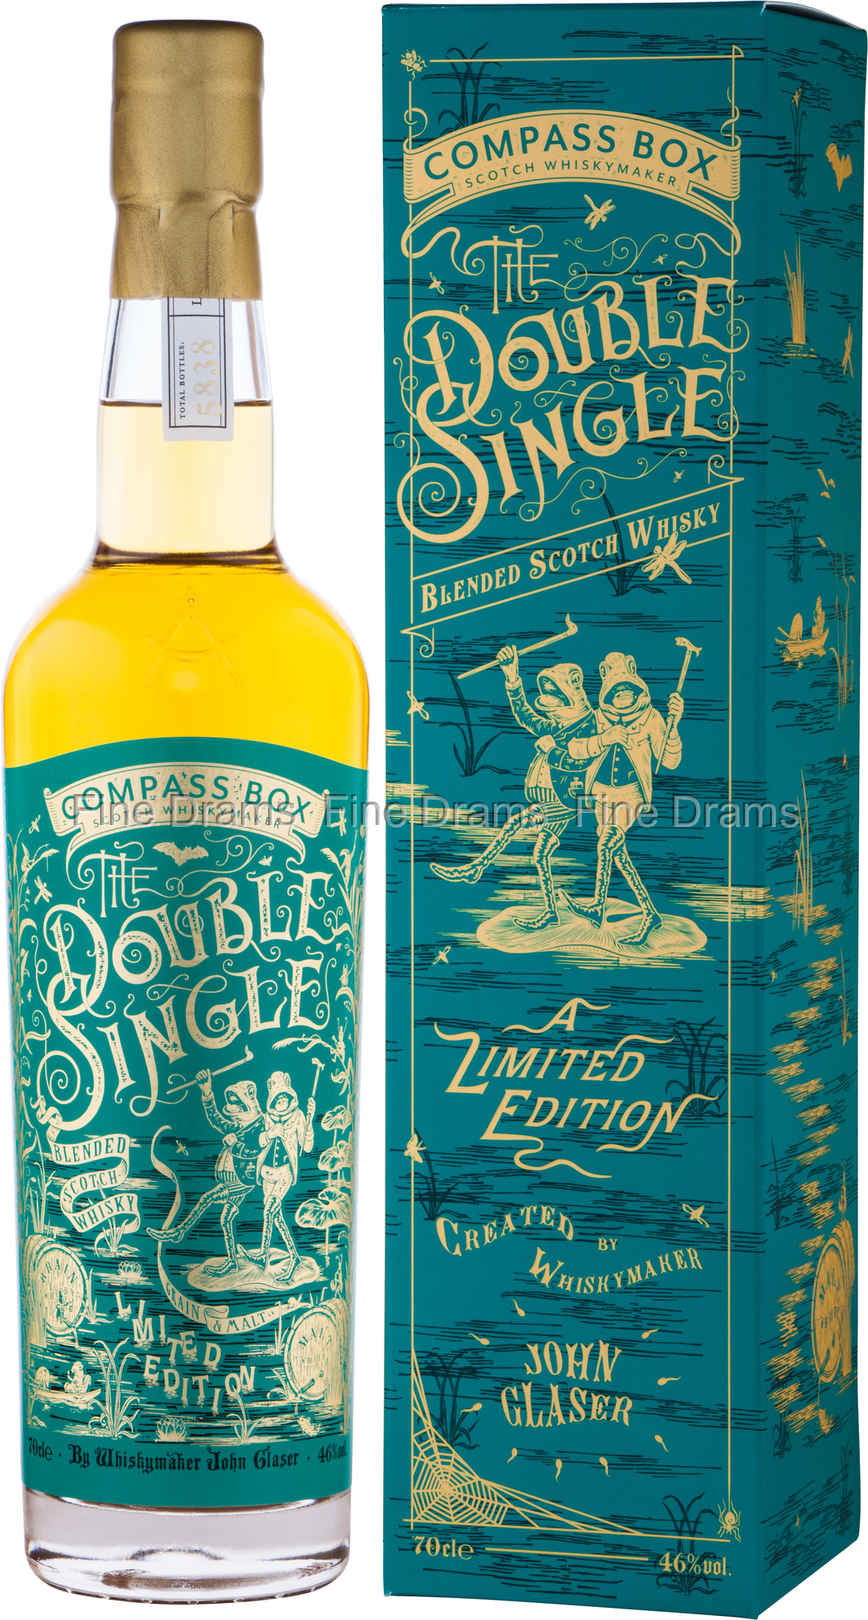 The Double Single Limited Edition Whisky Compass Box Malt 